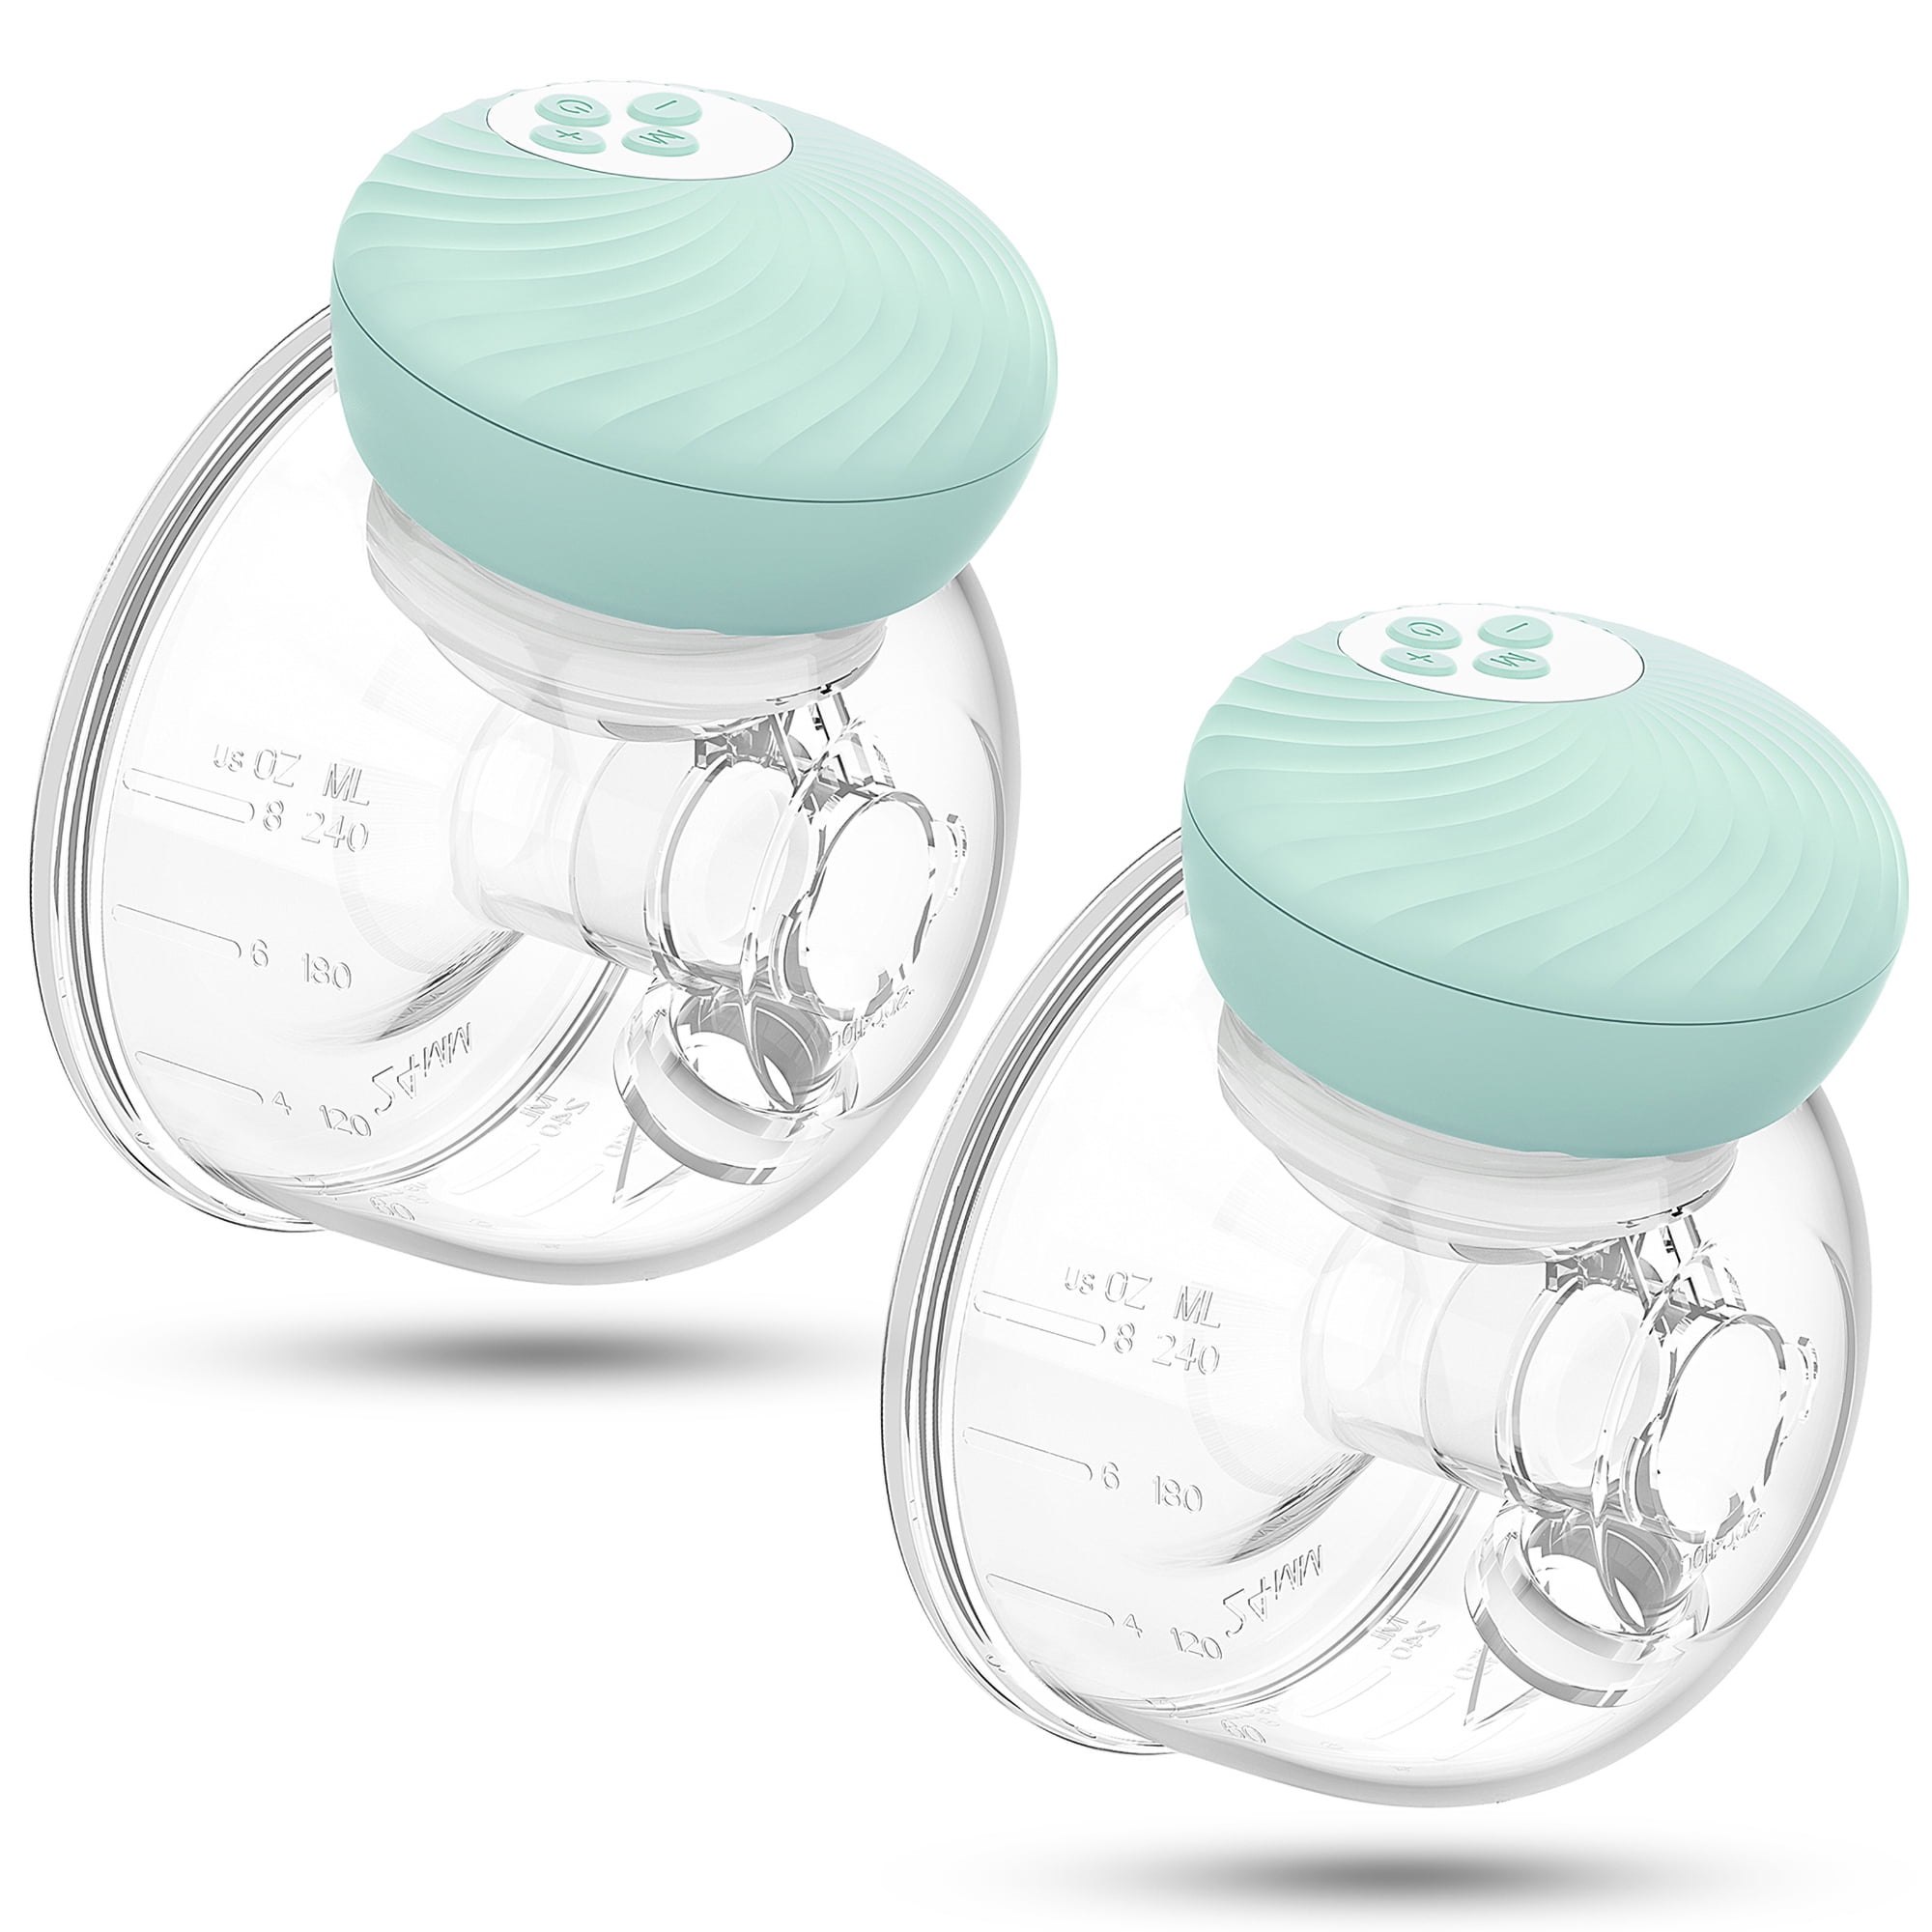 Wearable Breast Pump Hands-Free Portable with Leak-Proof Massage Function 3  Mode